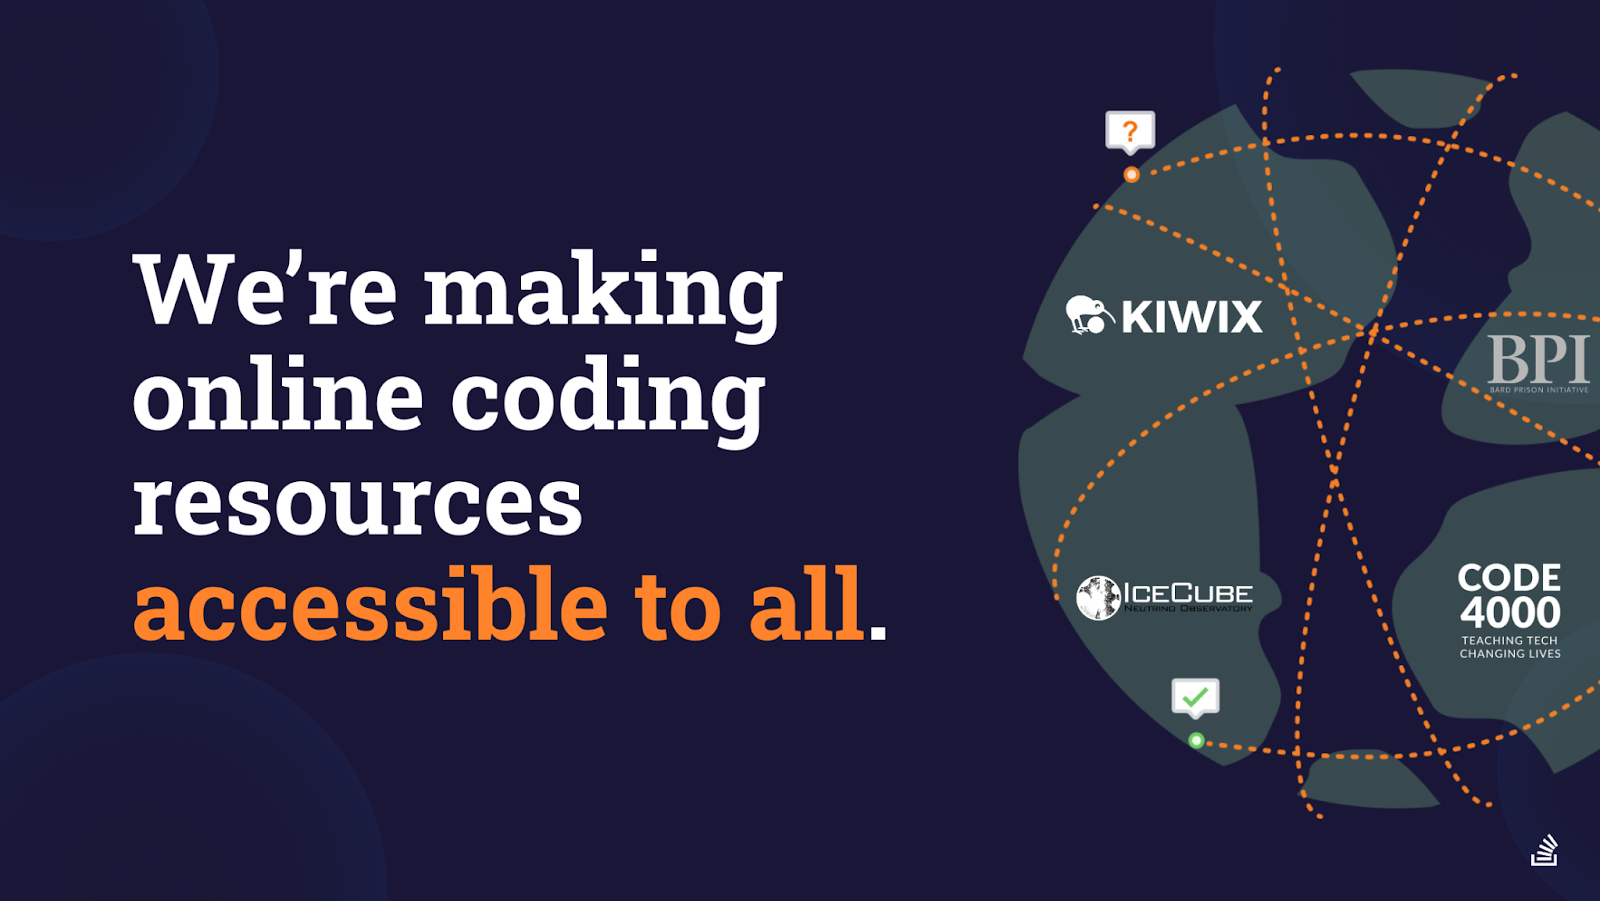 Text reads, "We're making online coding resources accessible to all." Shows a globe with the logos for Kiwix, BPI, IceCube, and Code 4000.